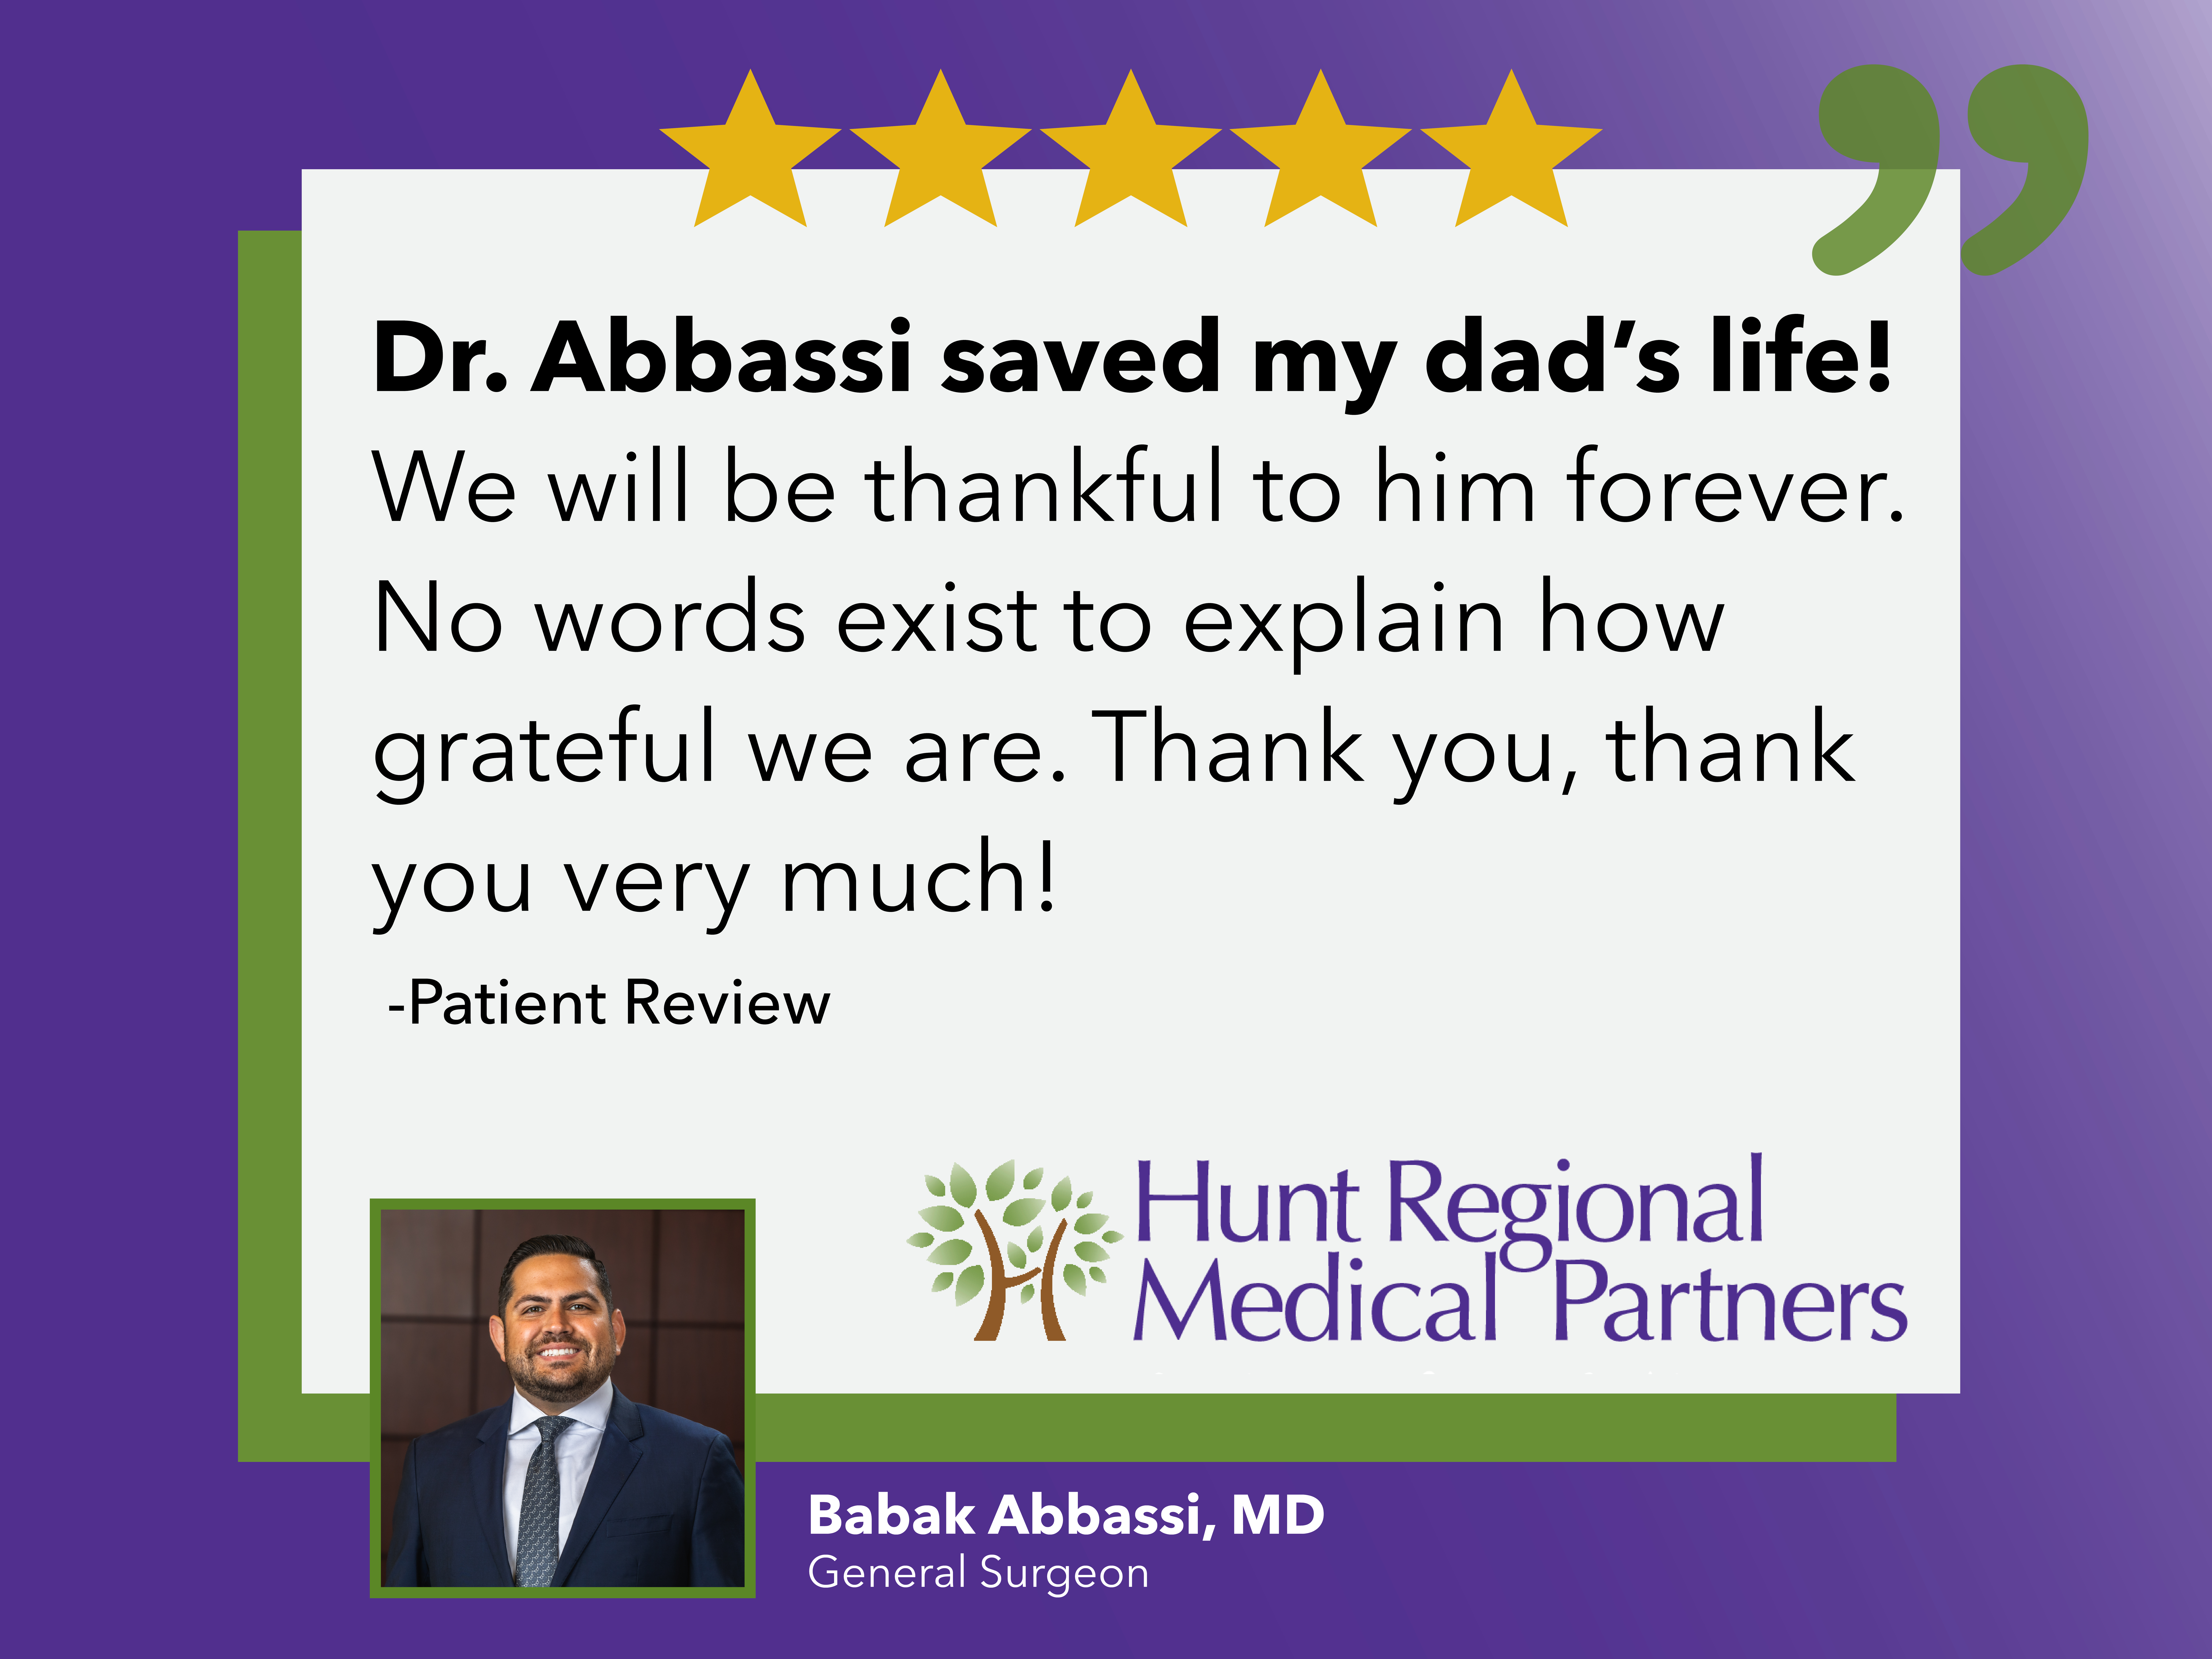 Dr. Abbassi saved my dad's life! We will be thankful to him forever. No words exist to explain how grateful we are. Thank, thank you very much! | Patient Review | Hunt Regional Medical Partners | Babak Abassi, MD | General Surgeon